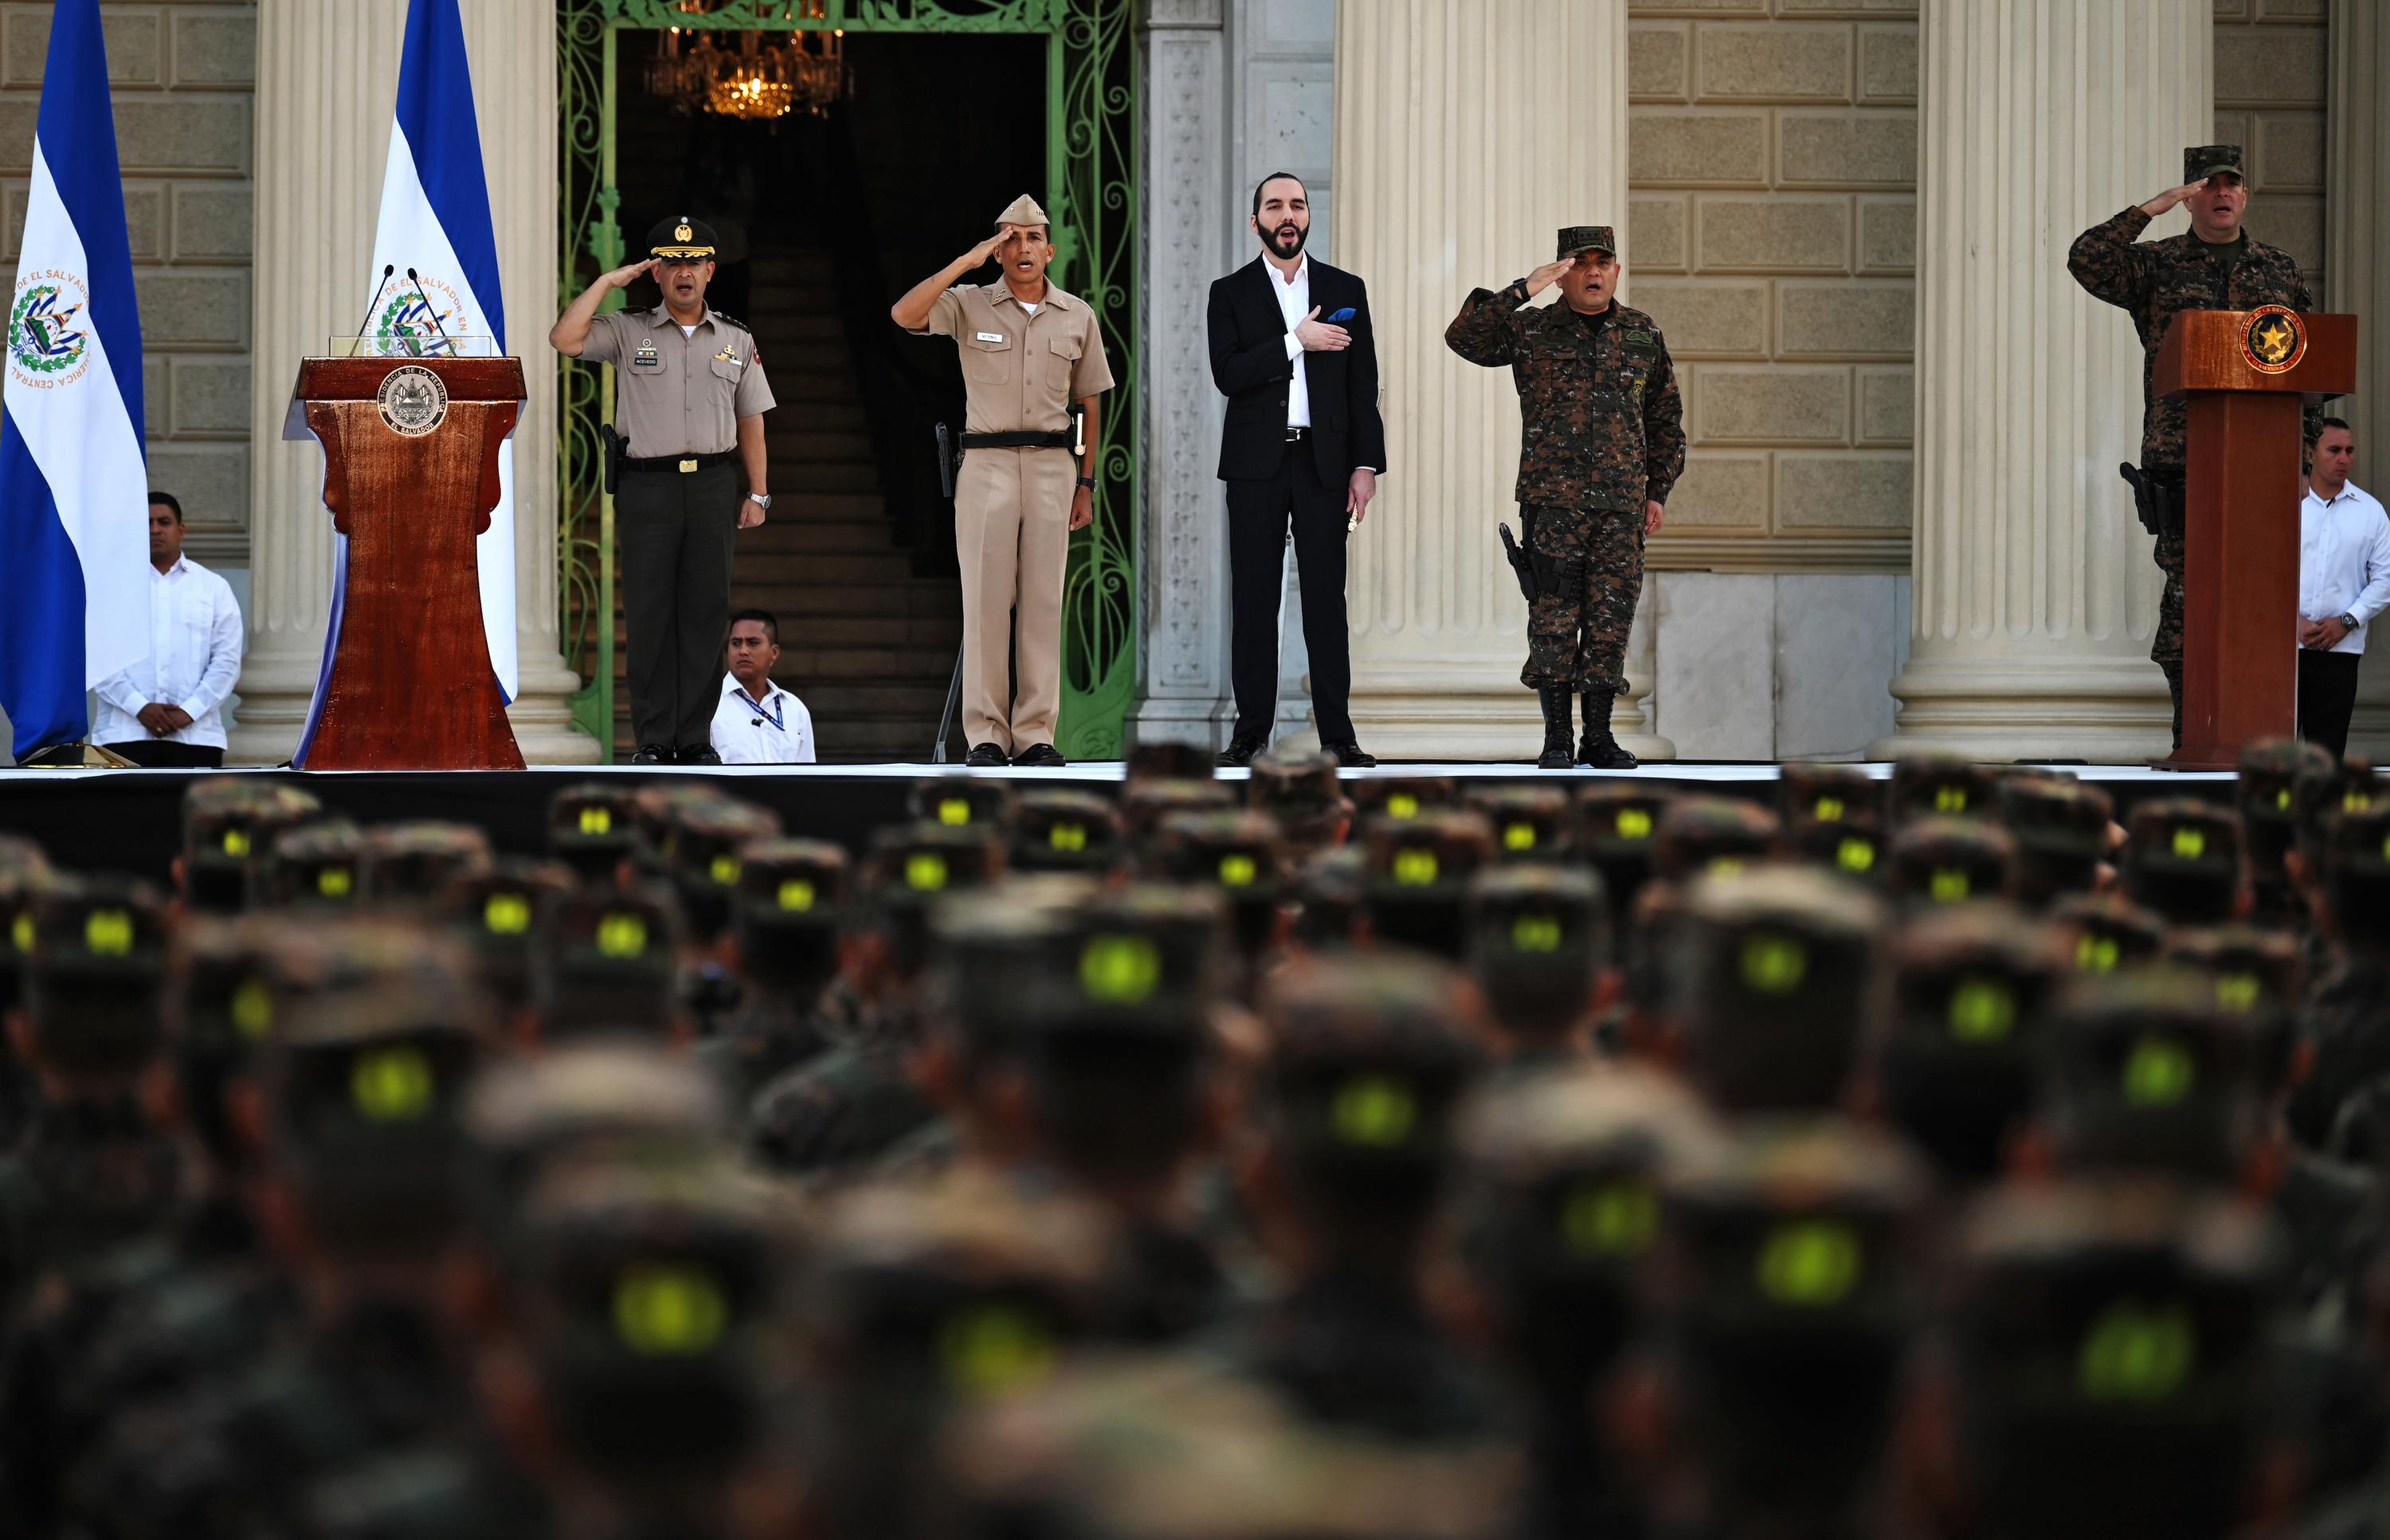 Photo Caption: President Nayib Bukele and minister of Defense, René Francis Merino Monroy, both center, during the swearing-in ceremony of 1,000 new soldiers to the Armed Forces on July 29, 2019. Photo courtesy AFP/Marvin Recinos